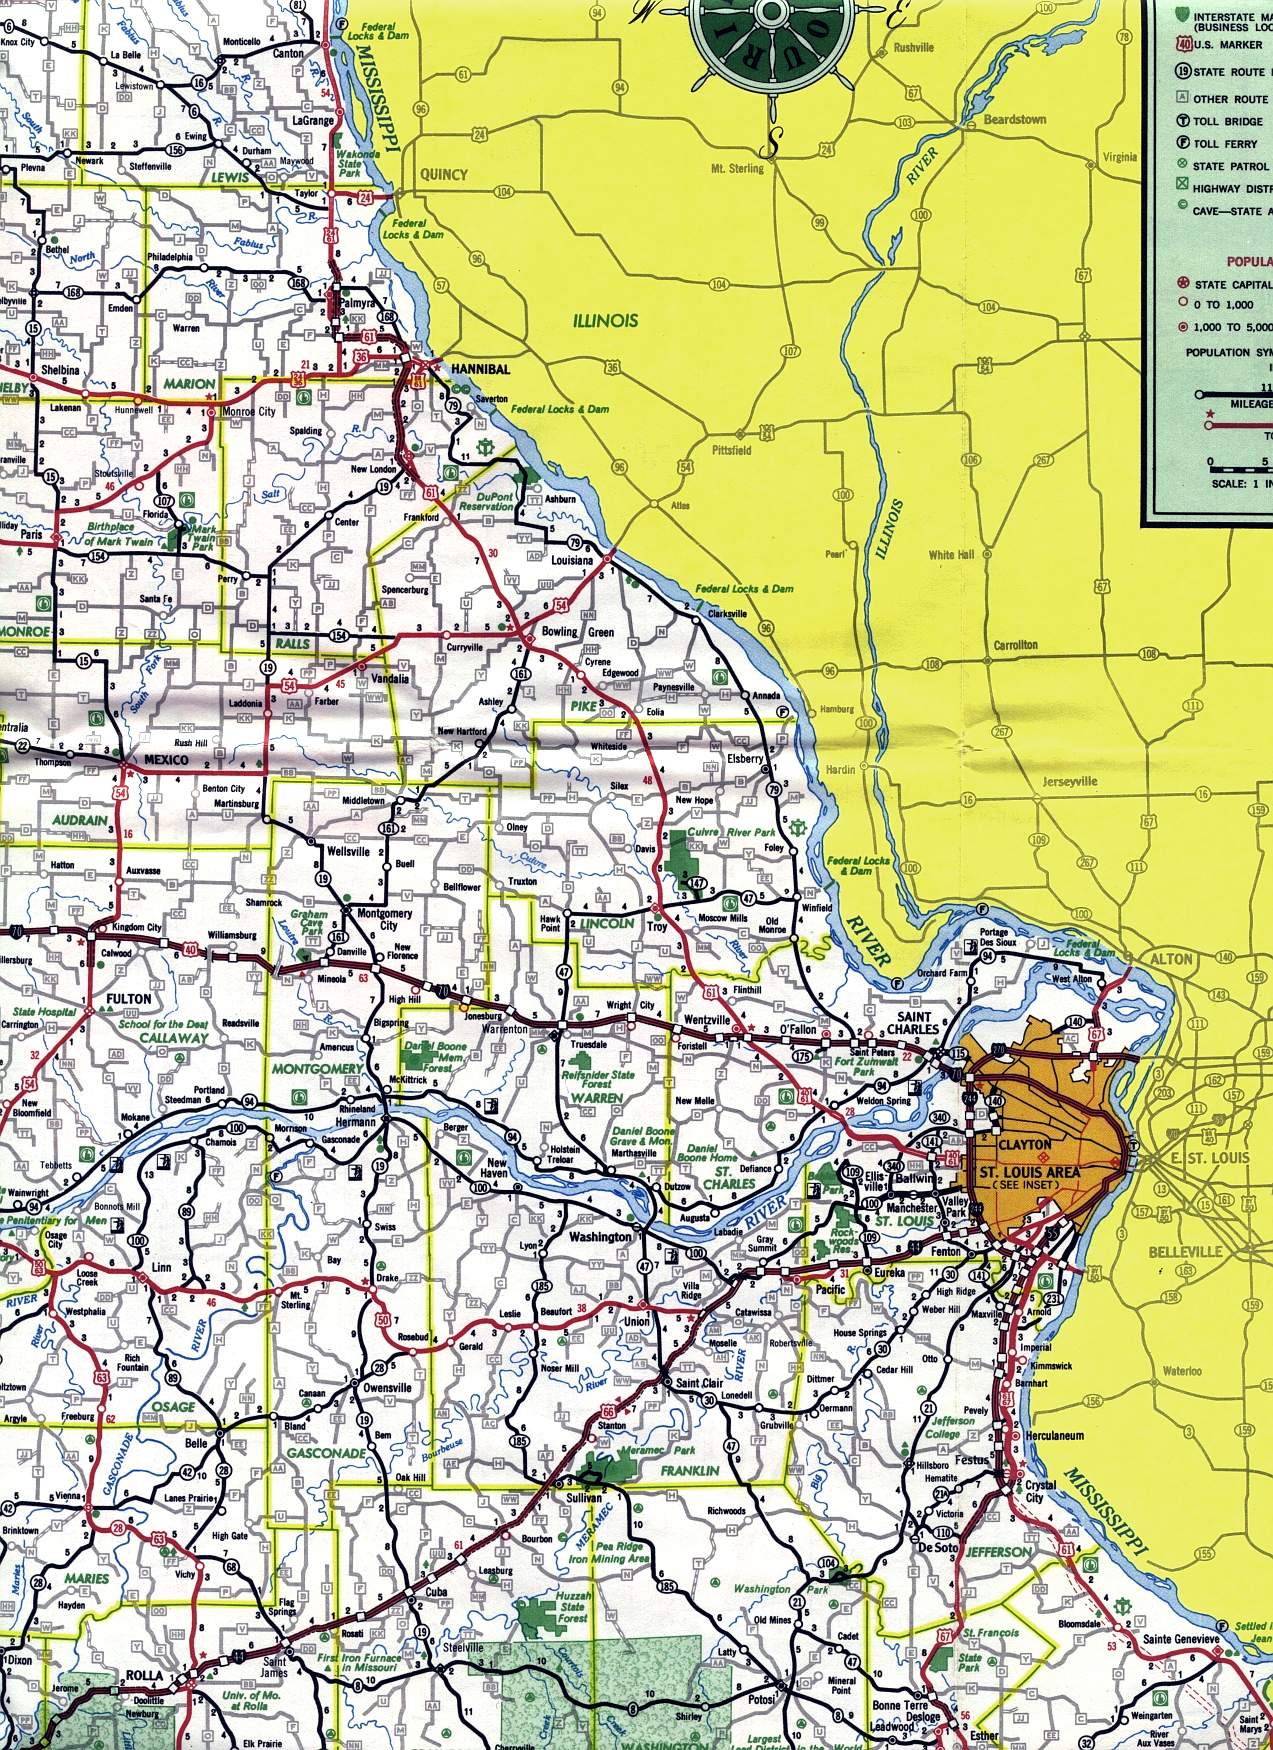 East-central section of Missouri from 1969 official highway map